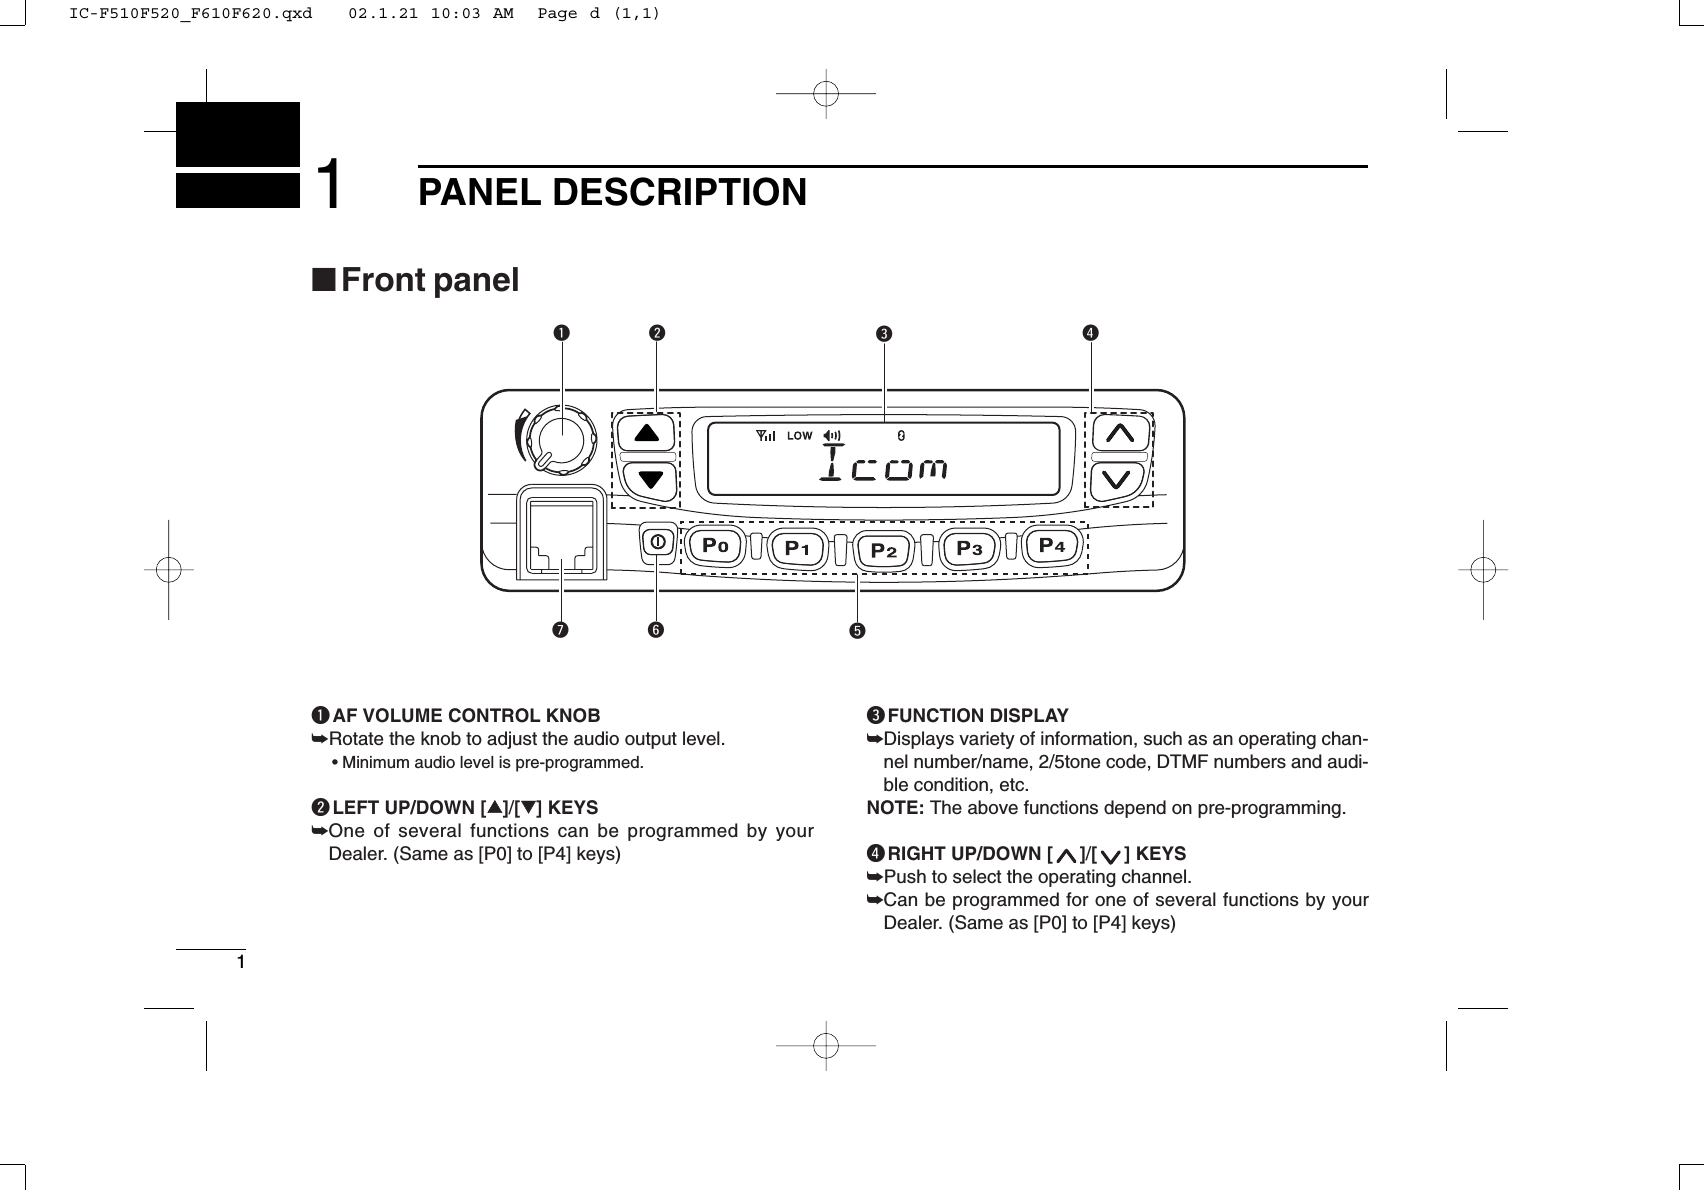 11PANEL DESCRIPTIONuytrewq■Front panelqAF VOLUME CONTROL KNOB➥Rotate the knob to adjust the audio output level.• Minimum audio level is pre-programmed.wLEFT UP/DOWN [∫∫]/[√√] KEYS➥One of several functions can be programmed by yourDealer. (Same as [P0] to [P4] keys)eFUNCTION DISPLAY➥Displays variety of information, such as an operating chan-nel number/name, 2/5tone code, DTMF numbers and audi-ble condition, etc.NOTE: The above functions depend on pre-programming.rRIGHT UP/DOWN [ ]/[ ] KEYS➥Push to select the operating channel.➥Can be programmed for one of several functions by yourDealer. (Same as [P0] to [P4] keys)IC-F510F520_F610F620.qxd   02.1.21 10:03 AM  Page d (1,1)